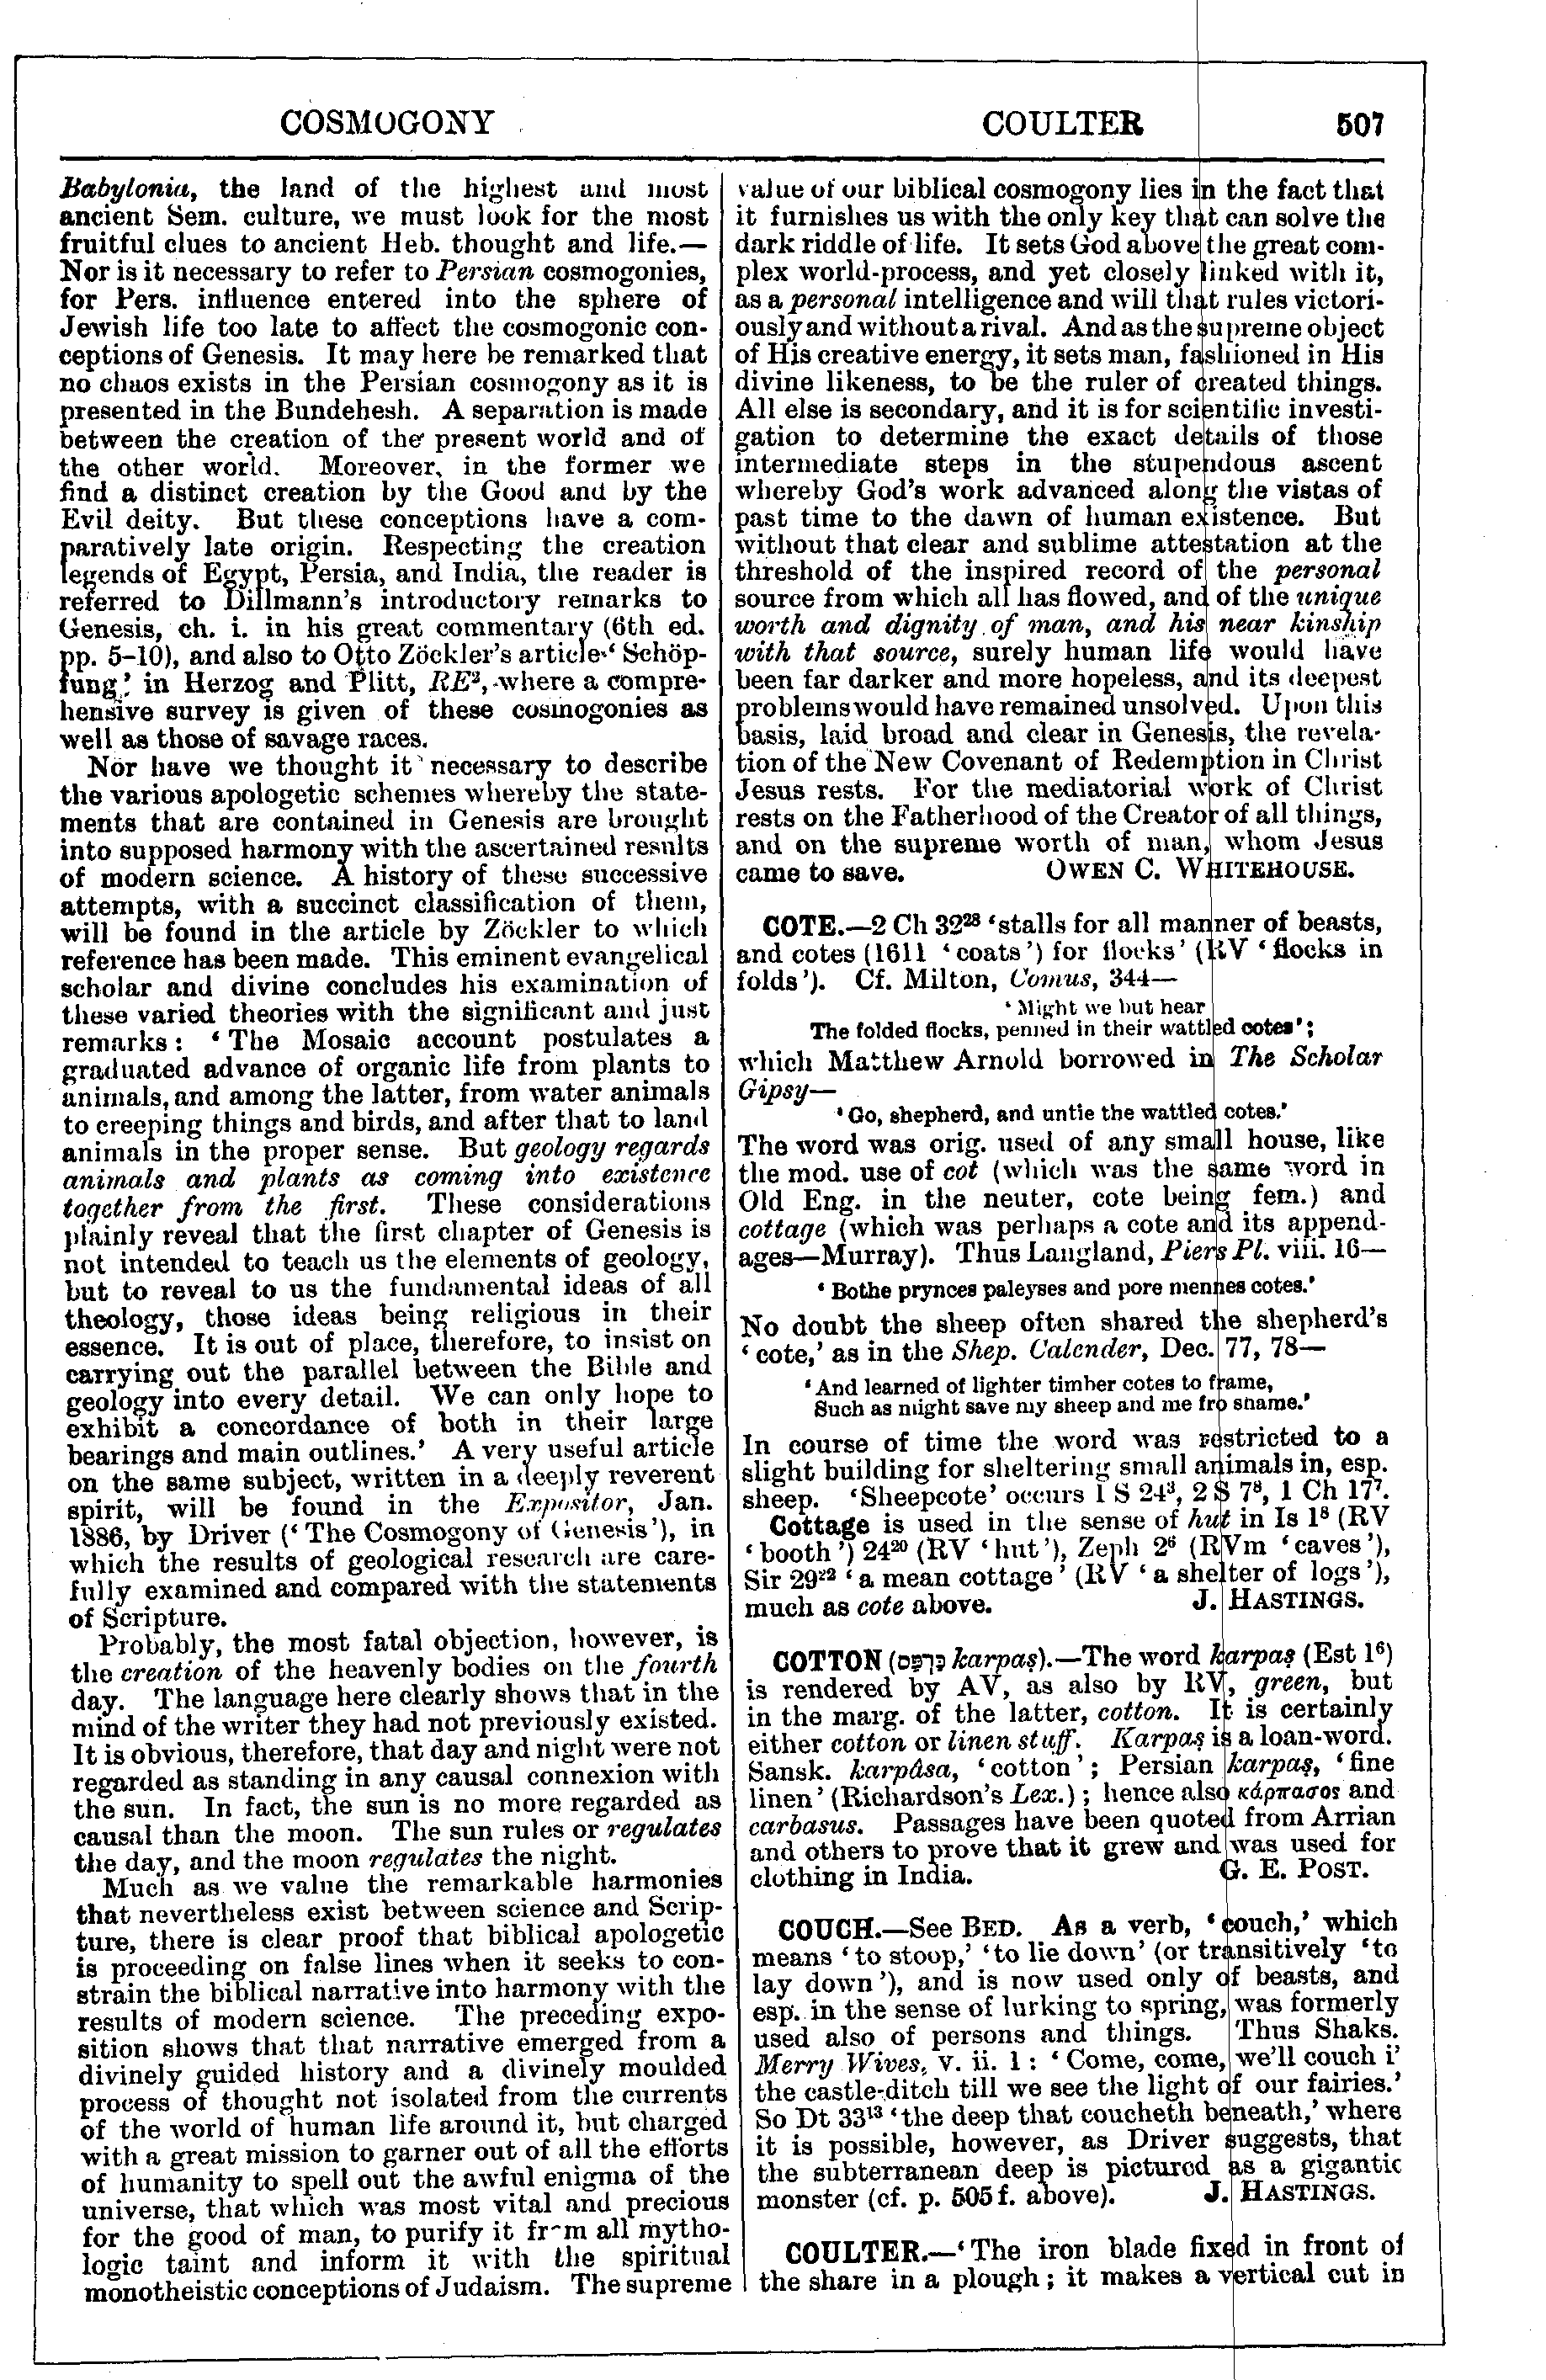 Image of page 507